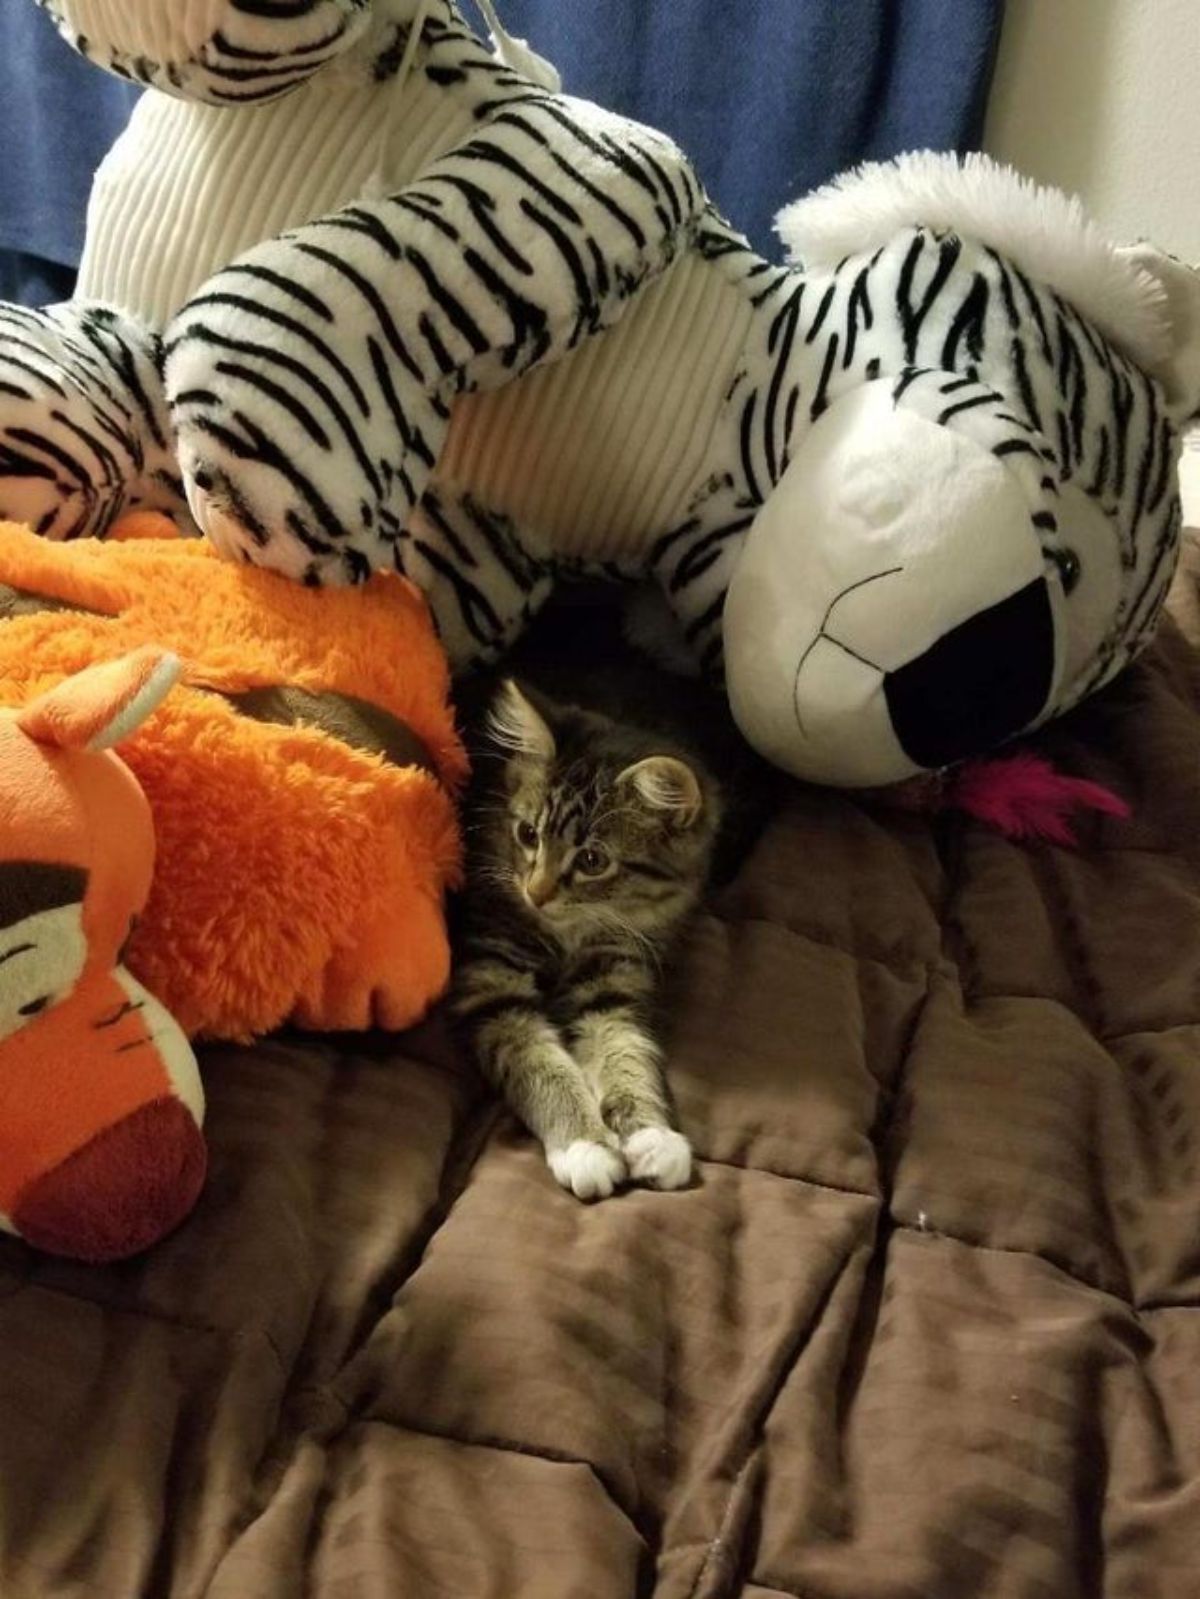 stuffed toys - tabby kitten on a brown bed under some big stuffed toys